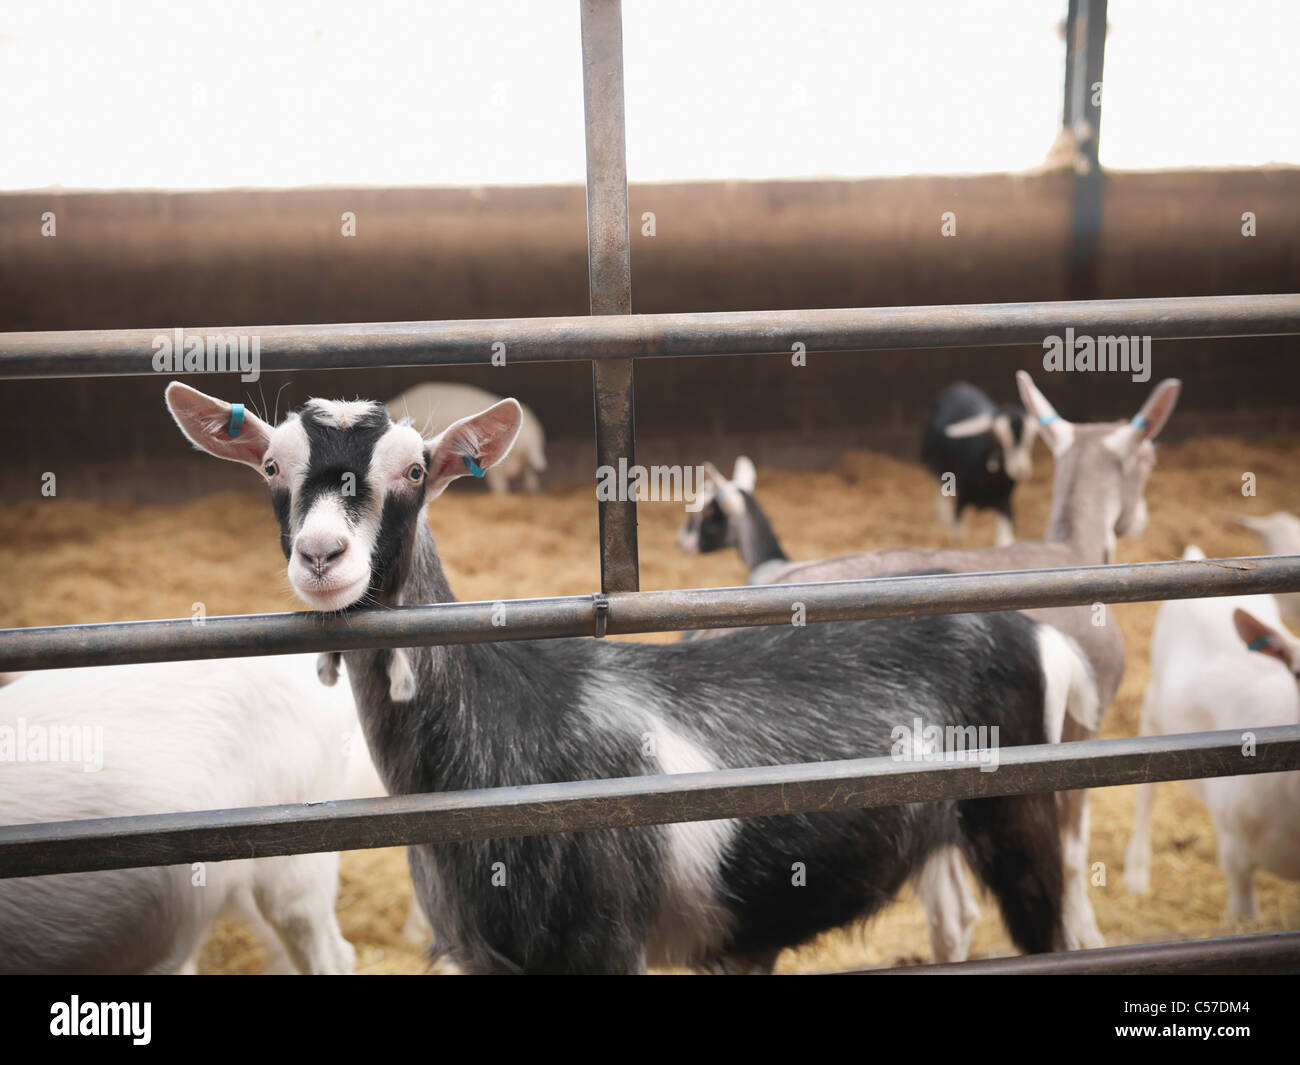 Goats standing in pen on farm Stock Photo